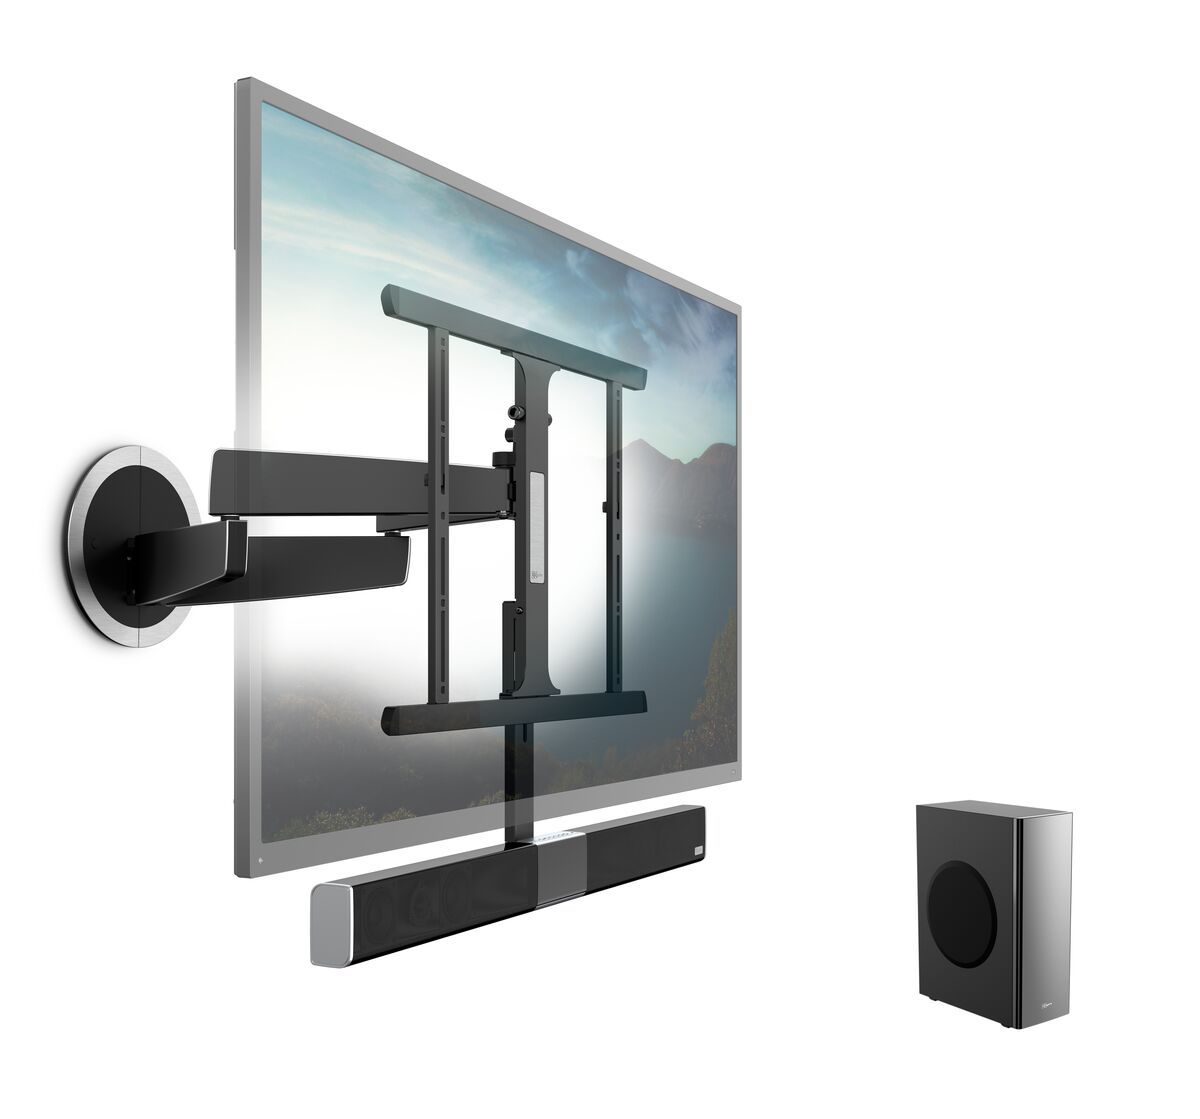 Vogel's SoundMount (NEXT 8365) Full-Motion TV Wall Mount with Integrated Sound 40 65 Motion (up to 120°) Product